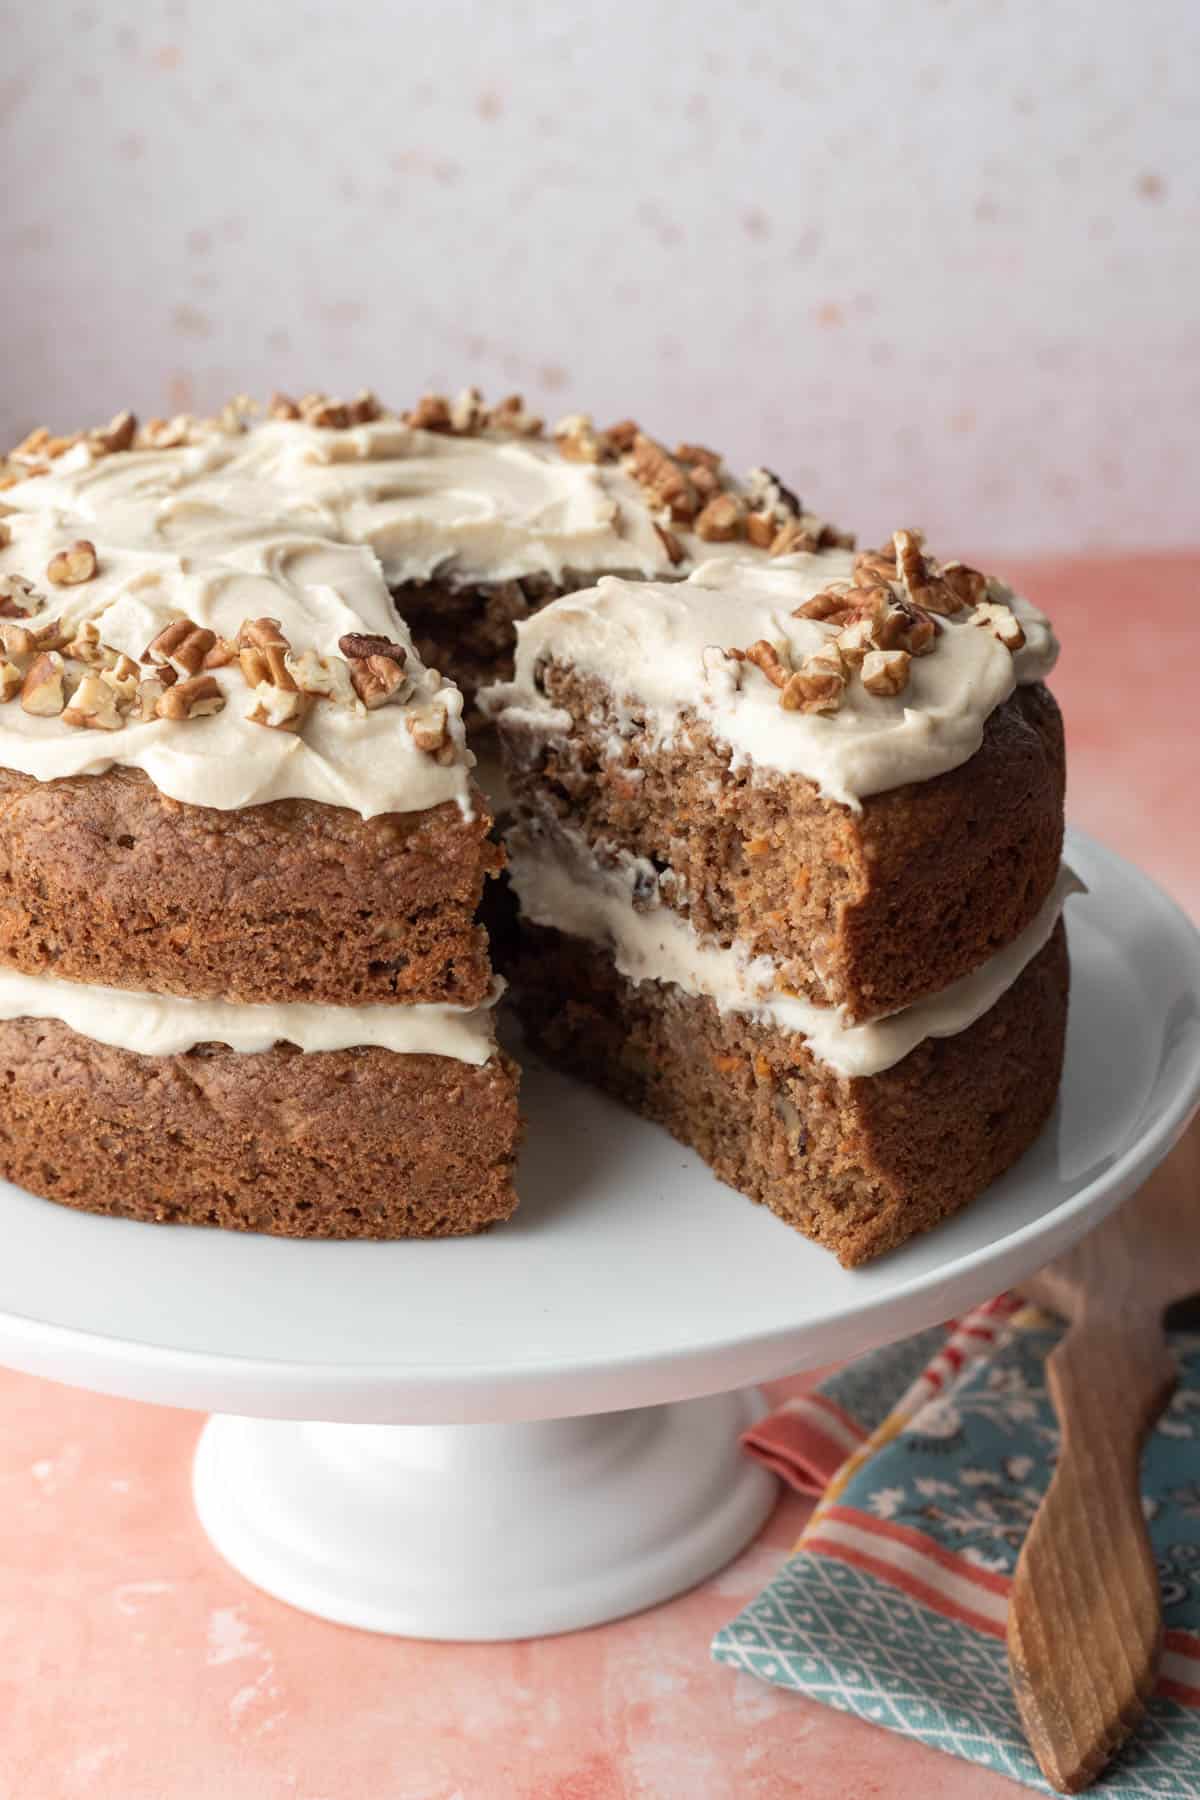 Two-layer vegan carrot cake with almond-based cream cheese frosting.